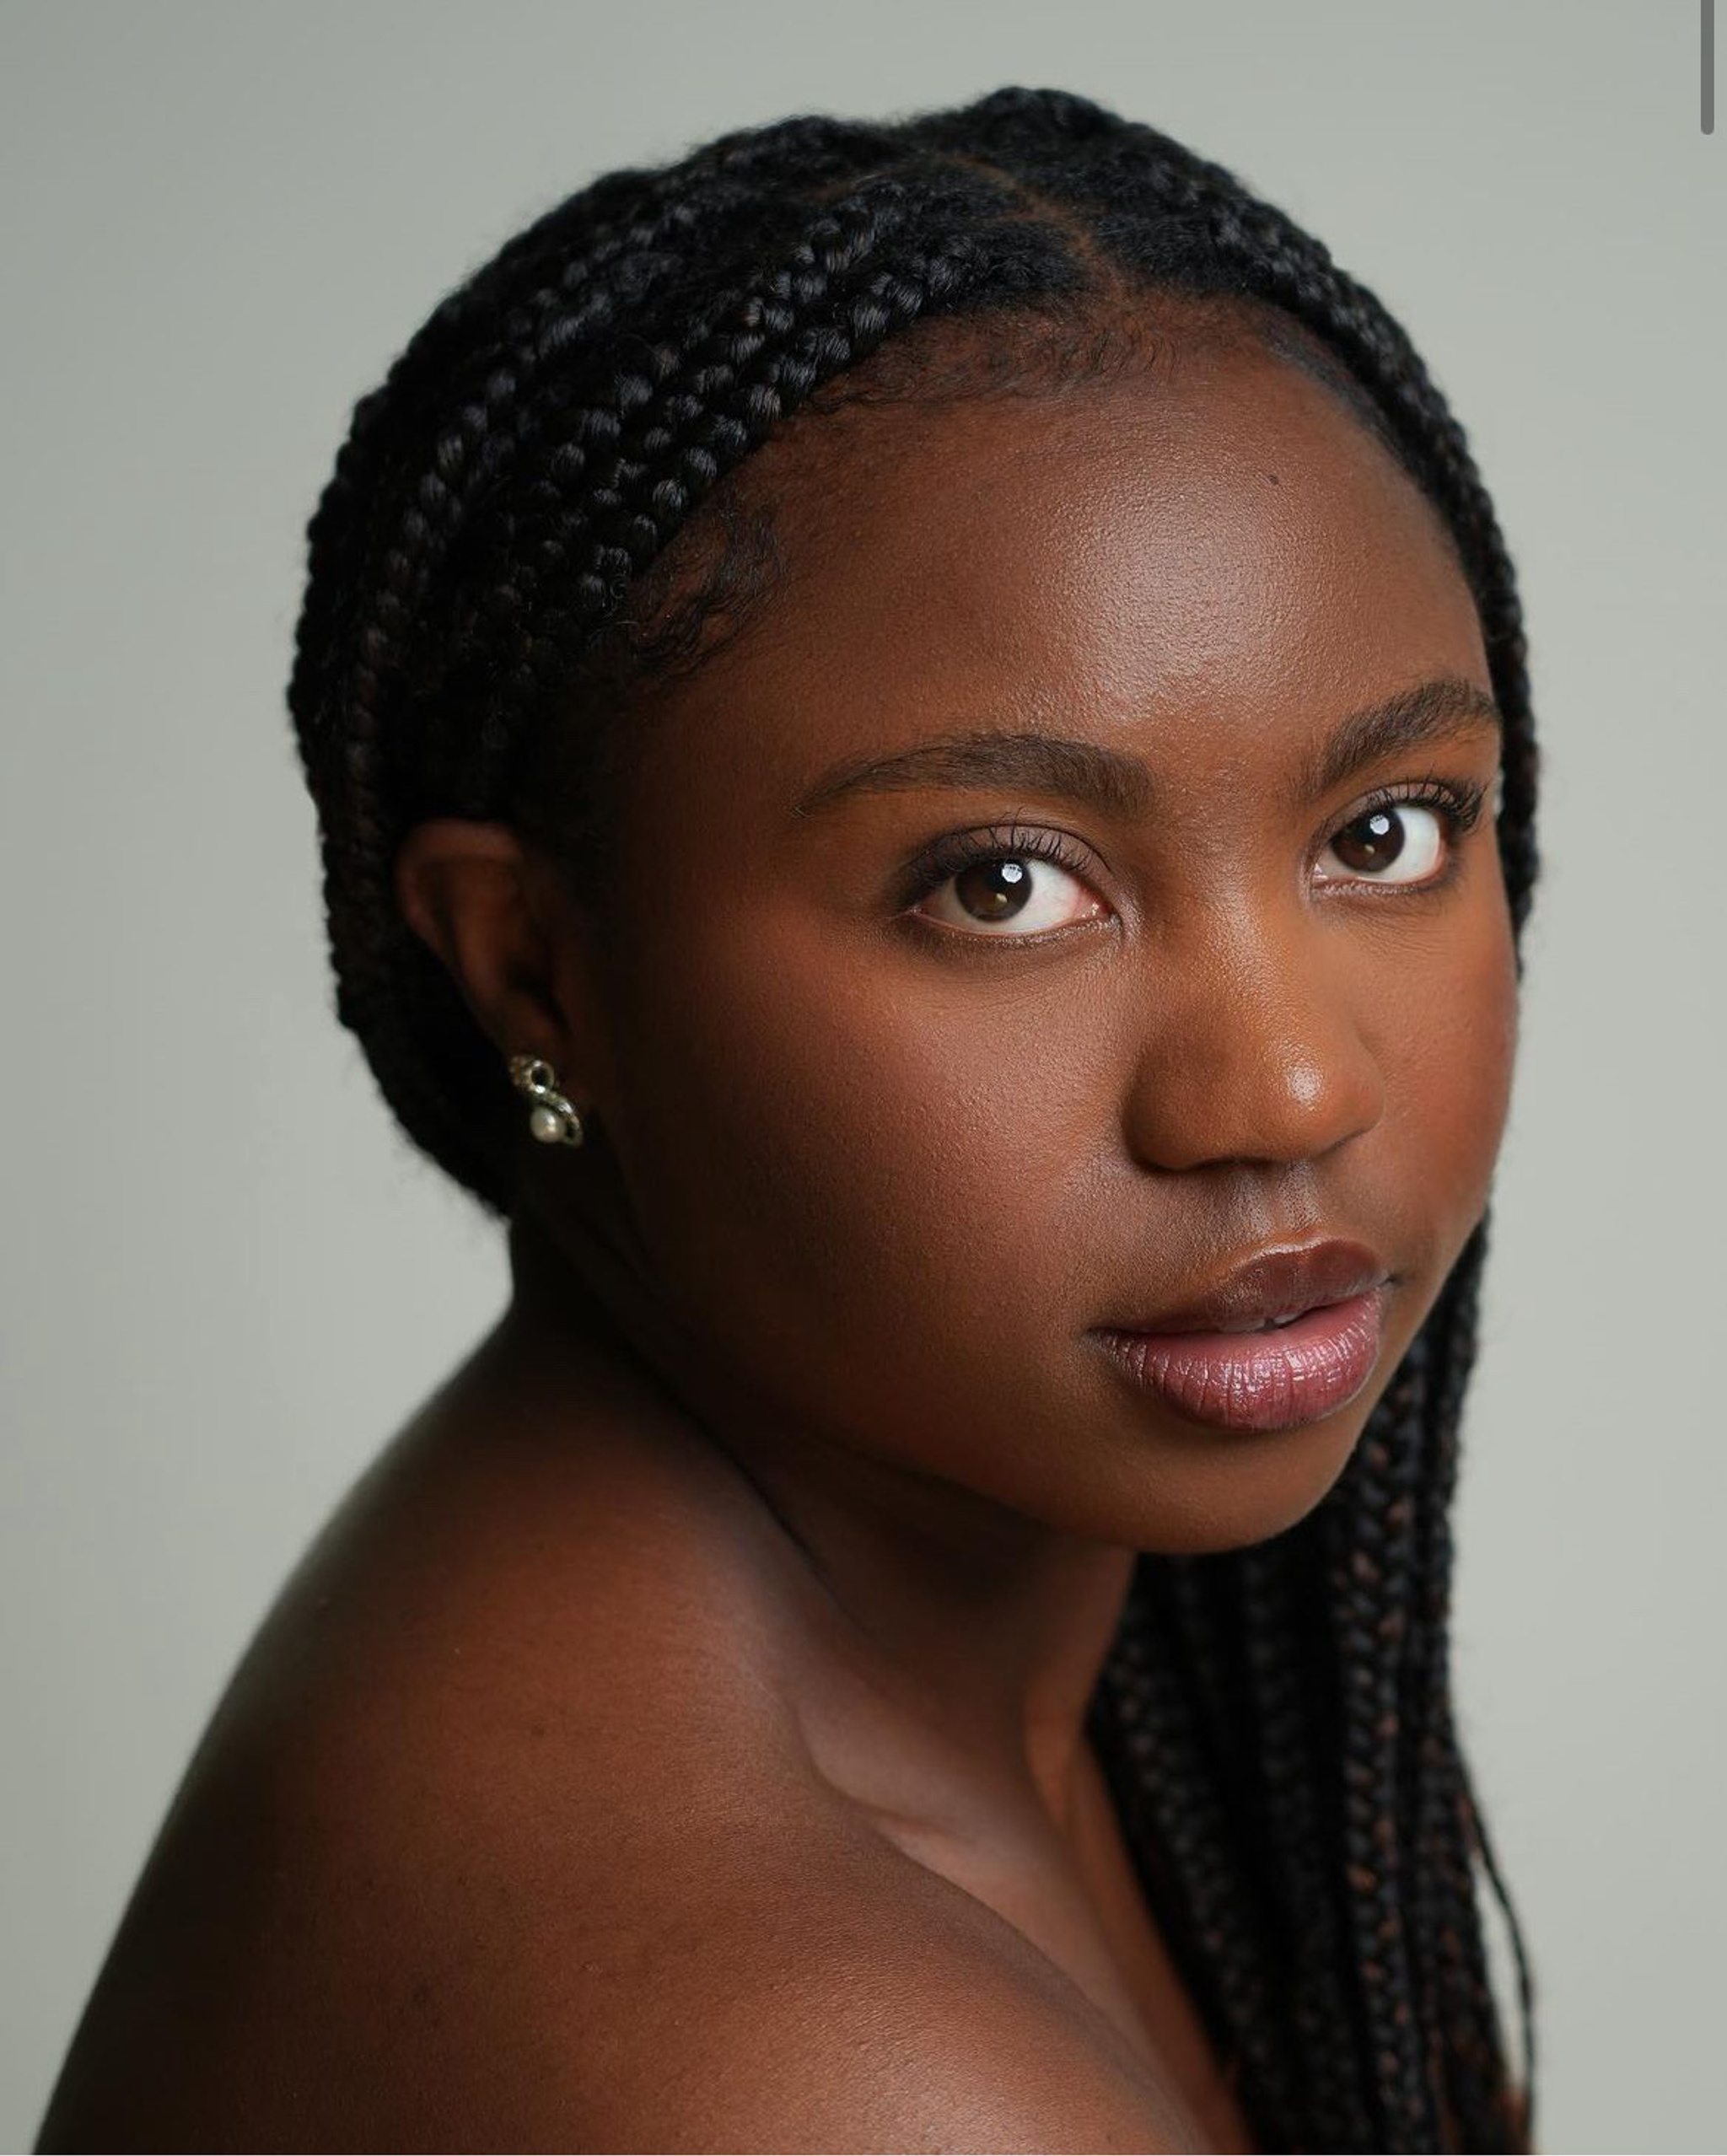 A headshot of dancer Libiya Gray, a Black woman who poses looking at us over one bare shoulder. Her braids are pulled around her head to hang down over her left shoulder. She looks directly at us expectantly. 